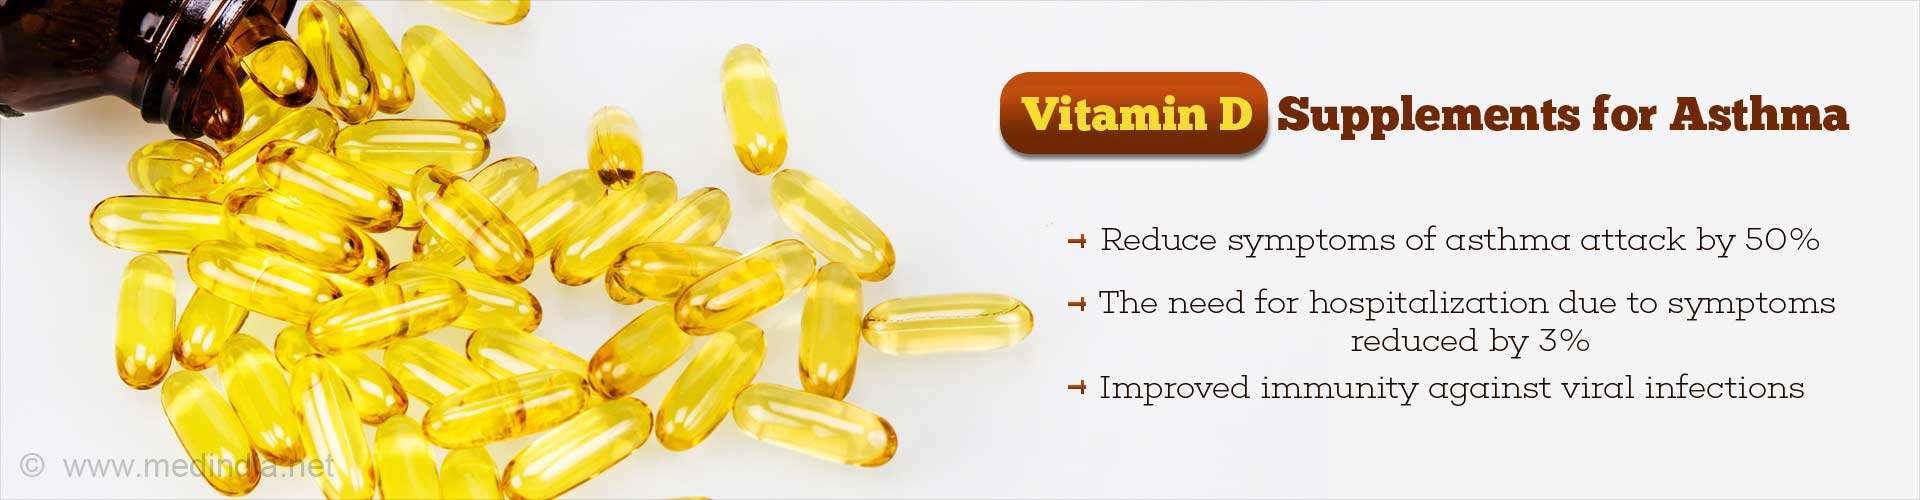 Vitamin D Supplements for Asthma
- Reduce symptoms of asthma attack by 50%
- The need for hospitalization due to symptoms reduced by 3%
- Improved immunity against viral infections